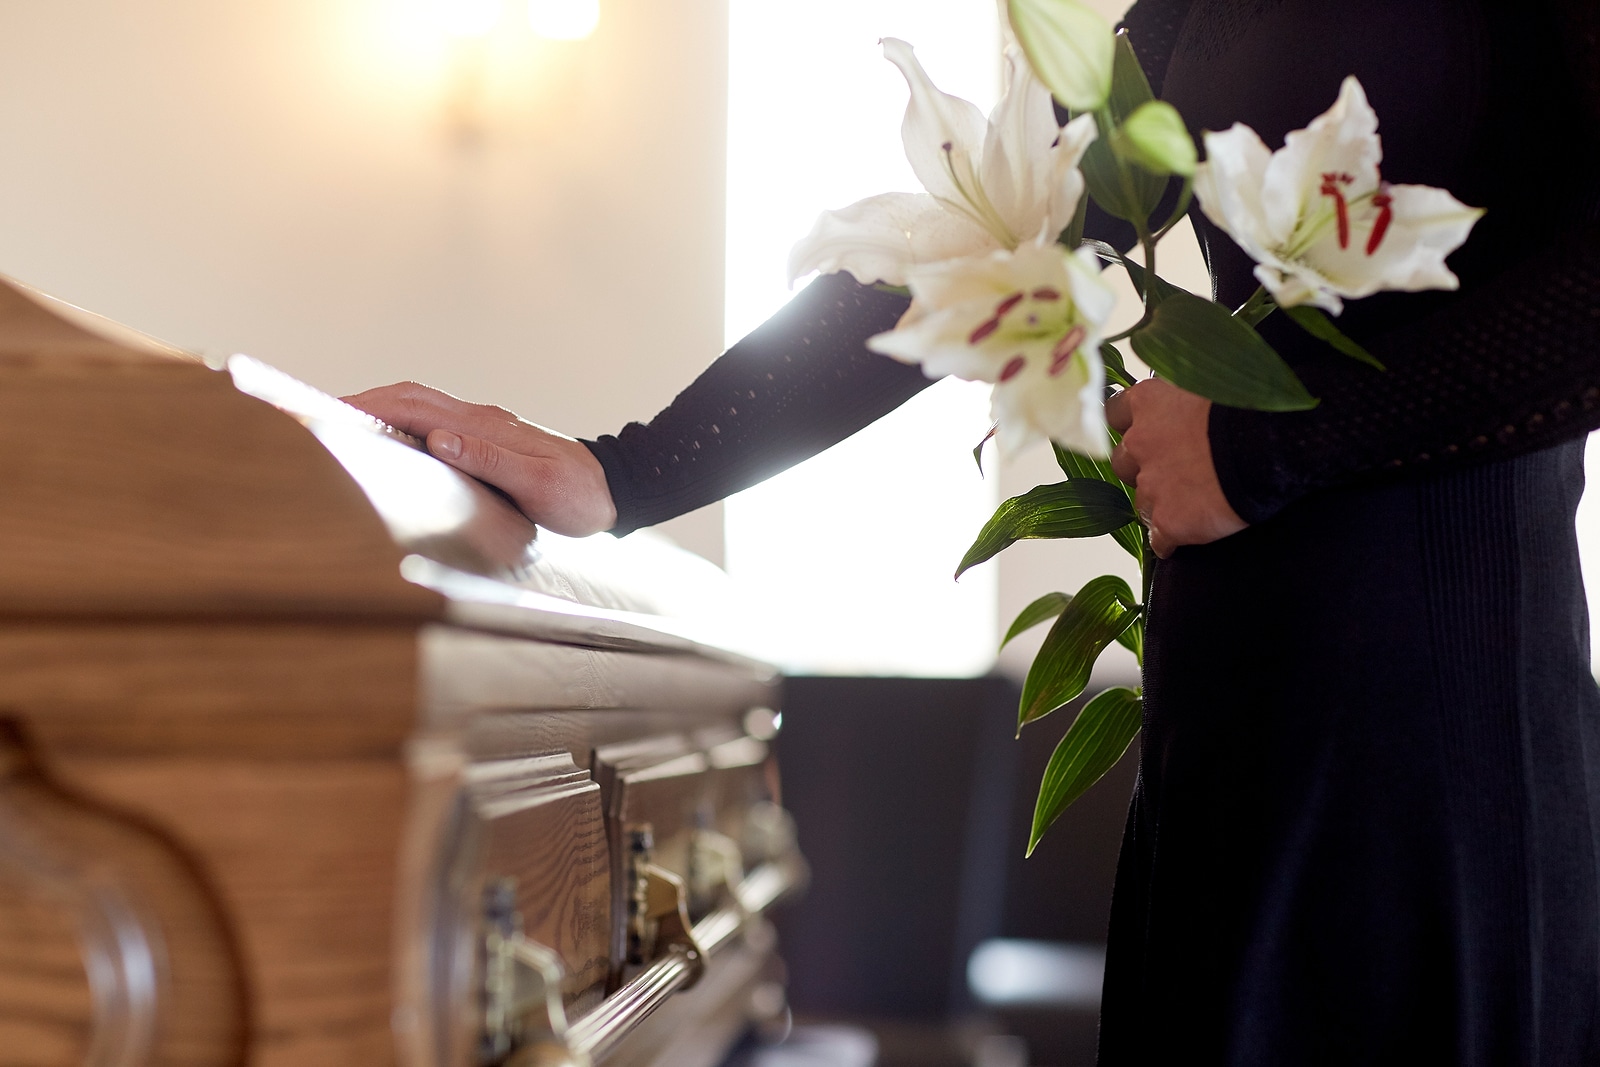 Who Can File a Wrongful Death Claim in Michigan?